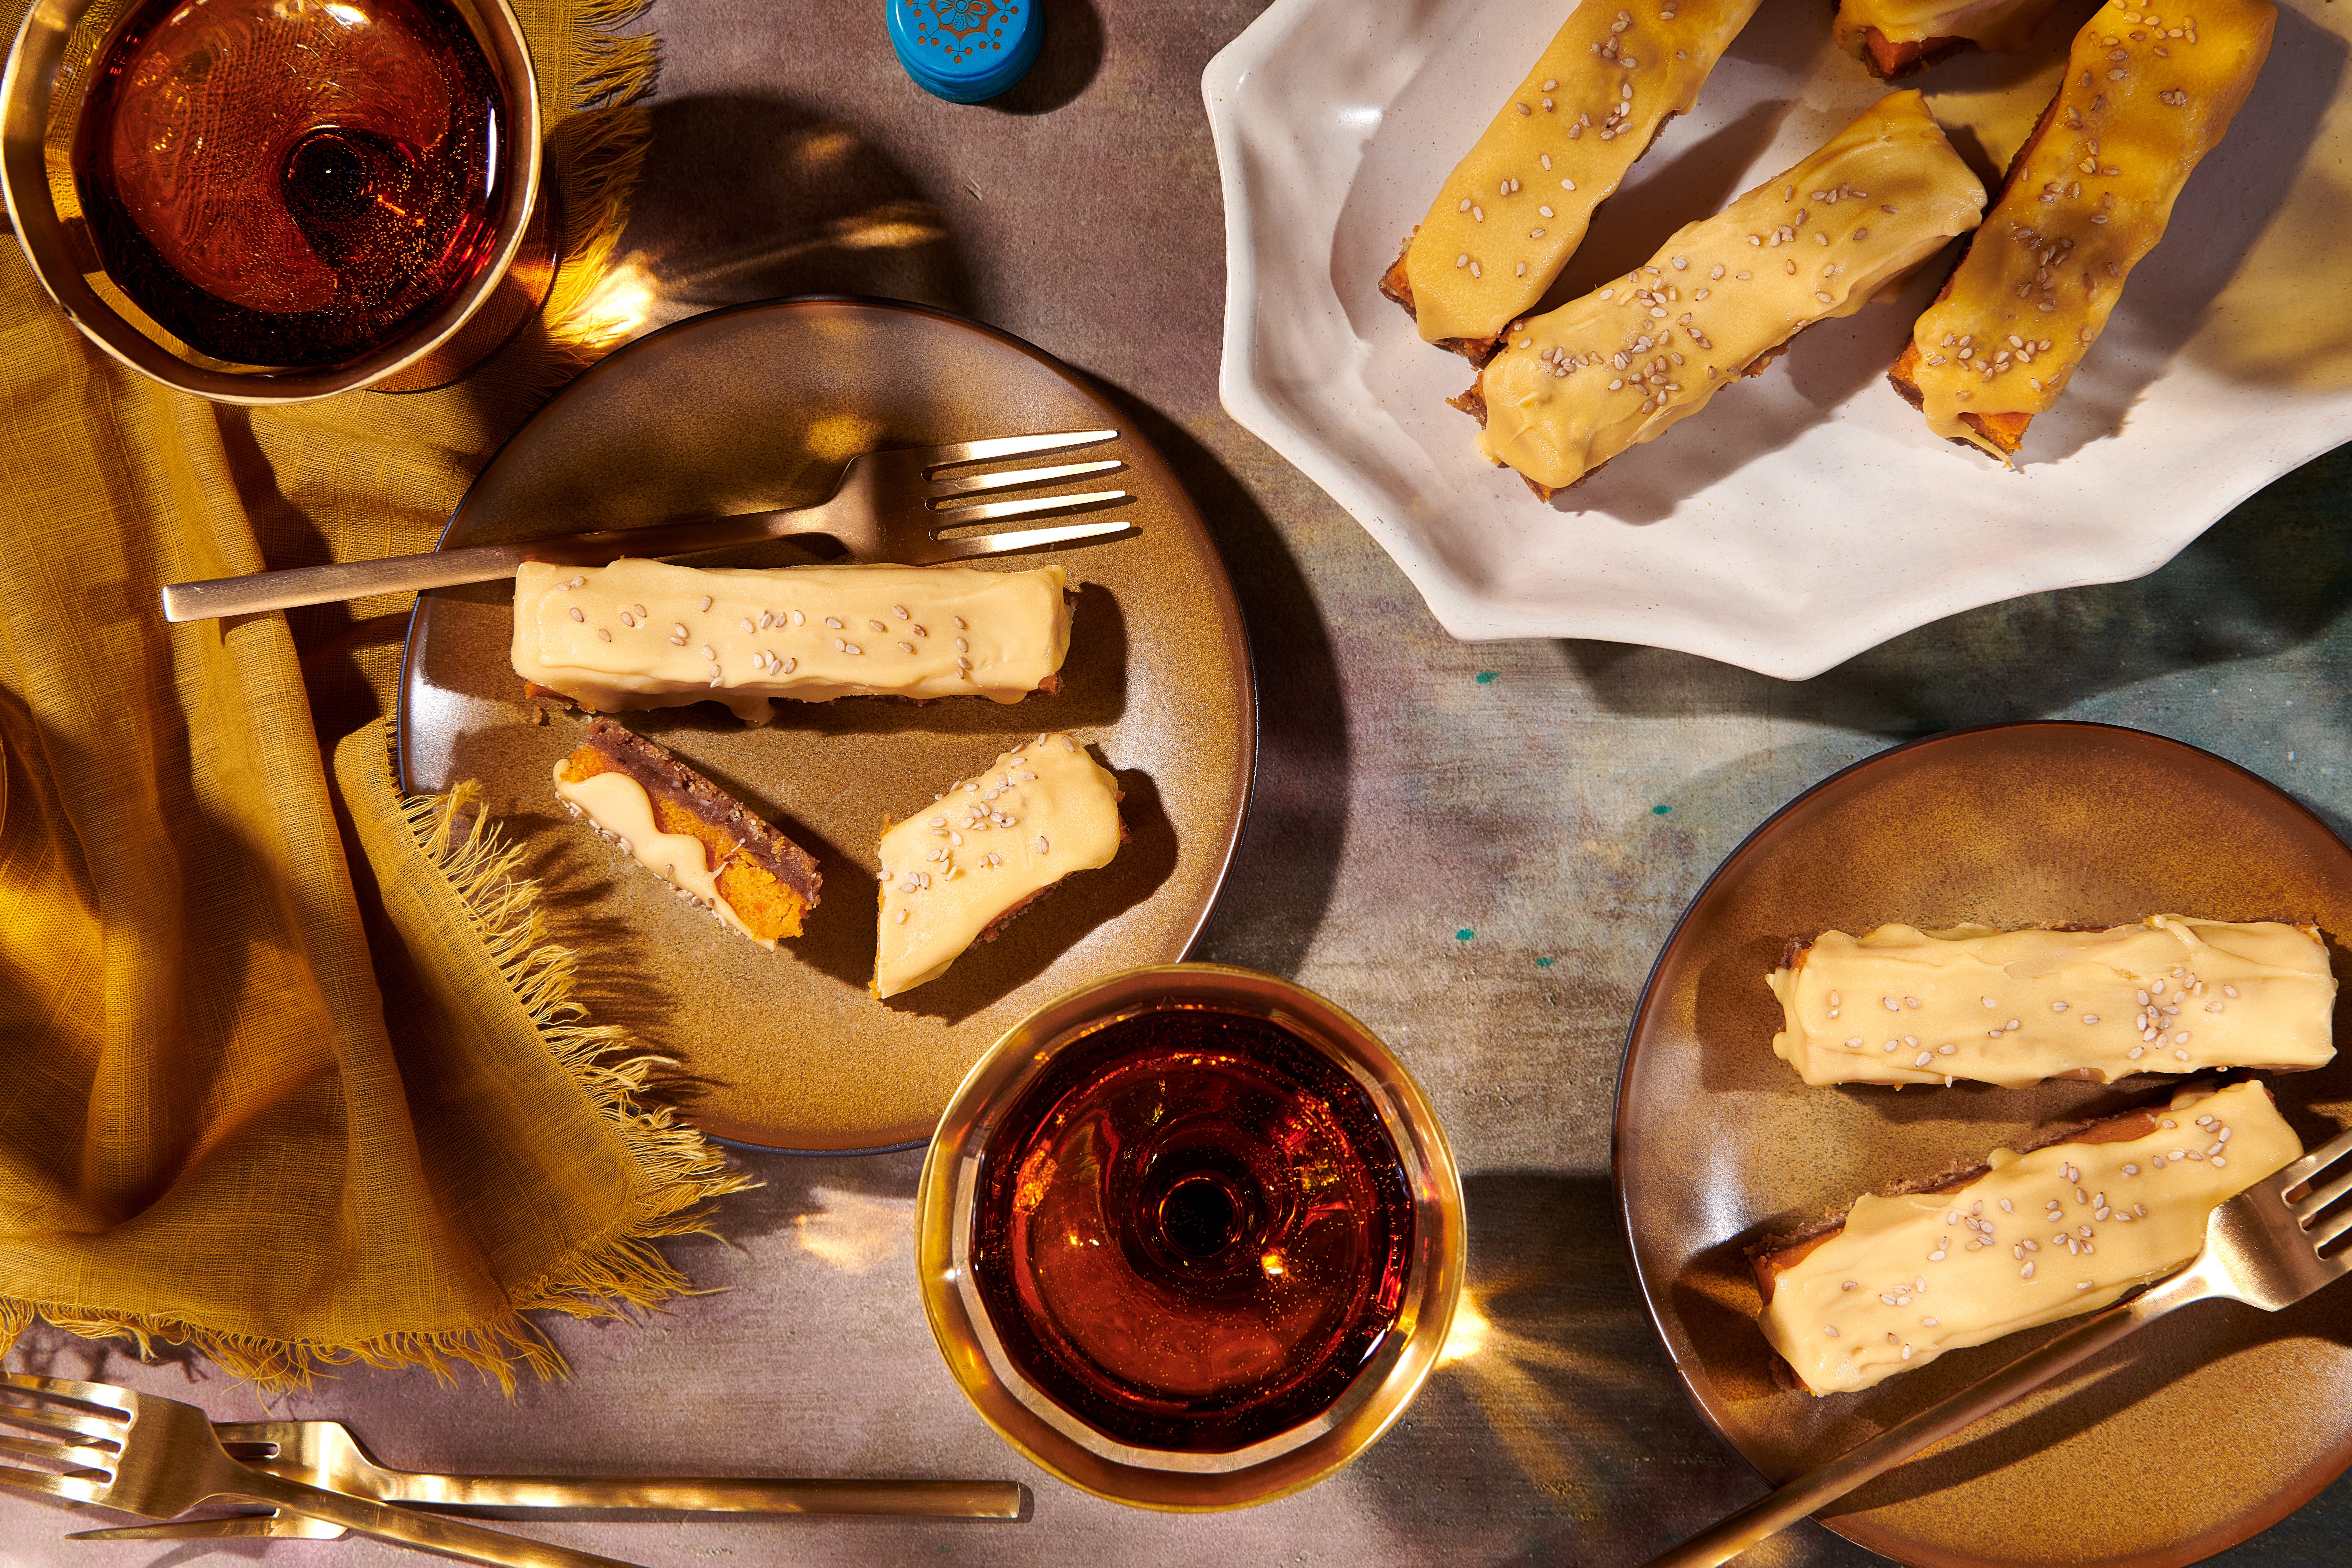 An assortment of sweet potato cheesecake bars arranged on small plates, with glasses of red wine next to them.